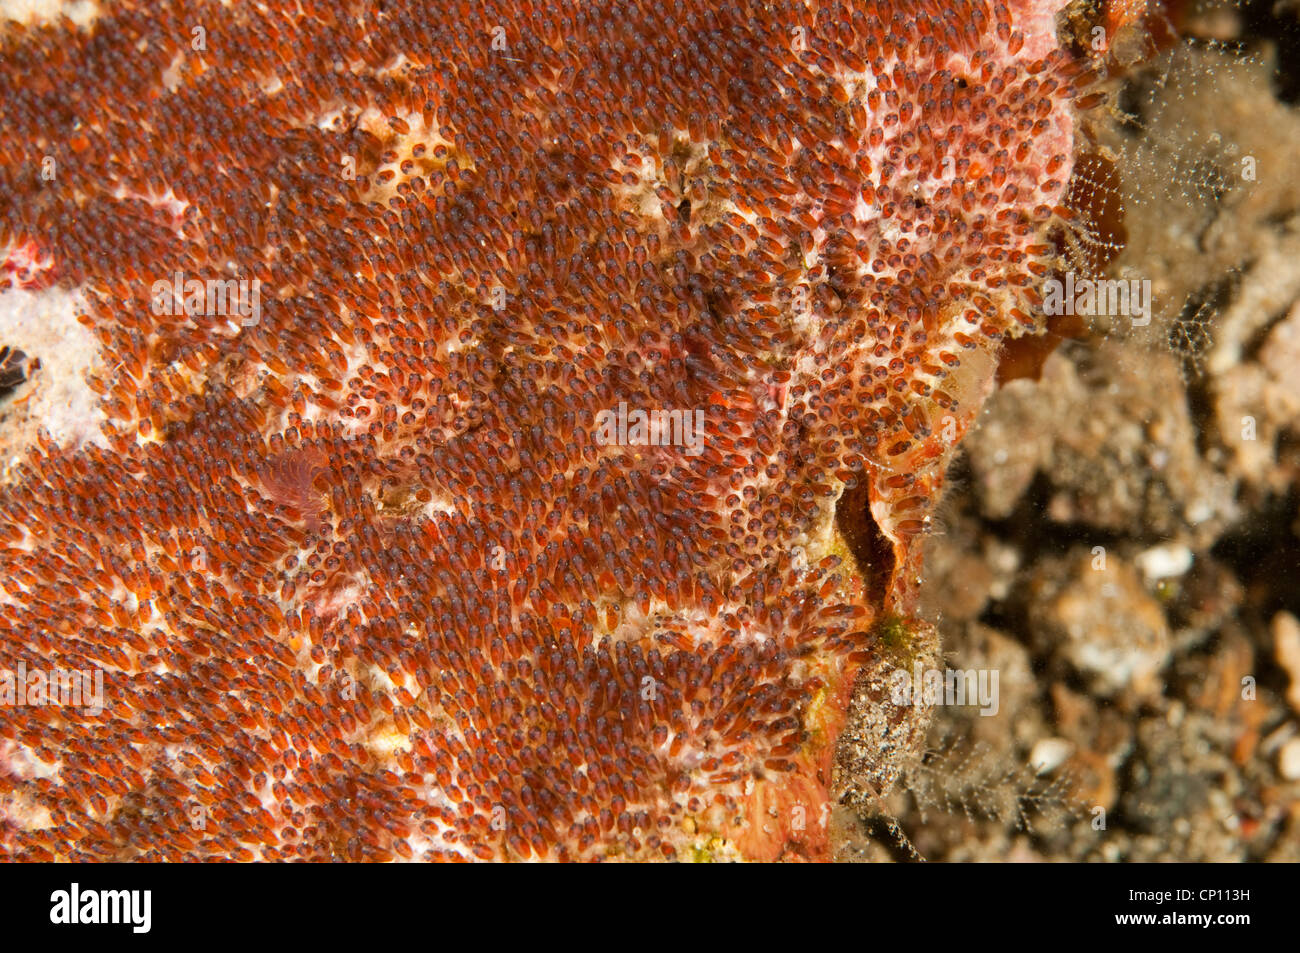 Anemonefish, Amphiprion sebae, eggs attached to a dead coral Sulawesi Indonesia Stock Photo